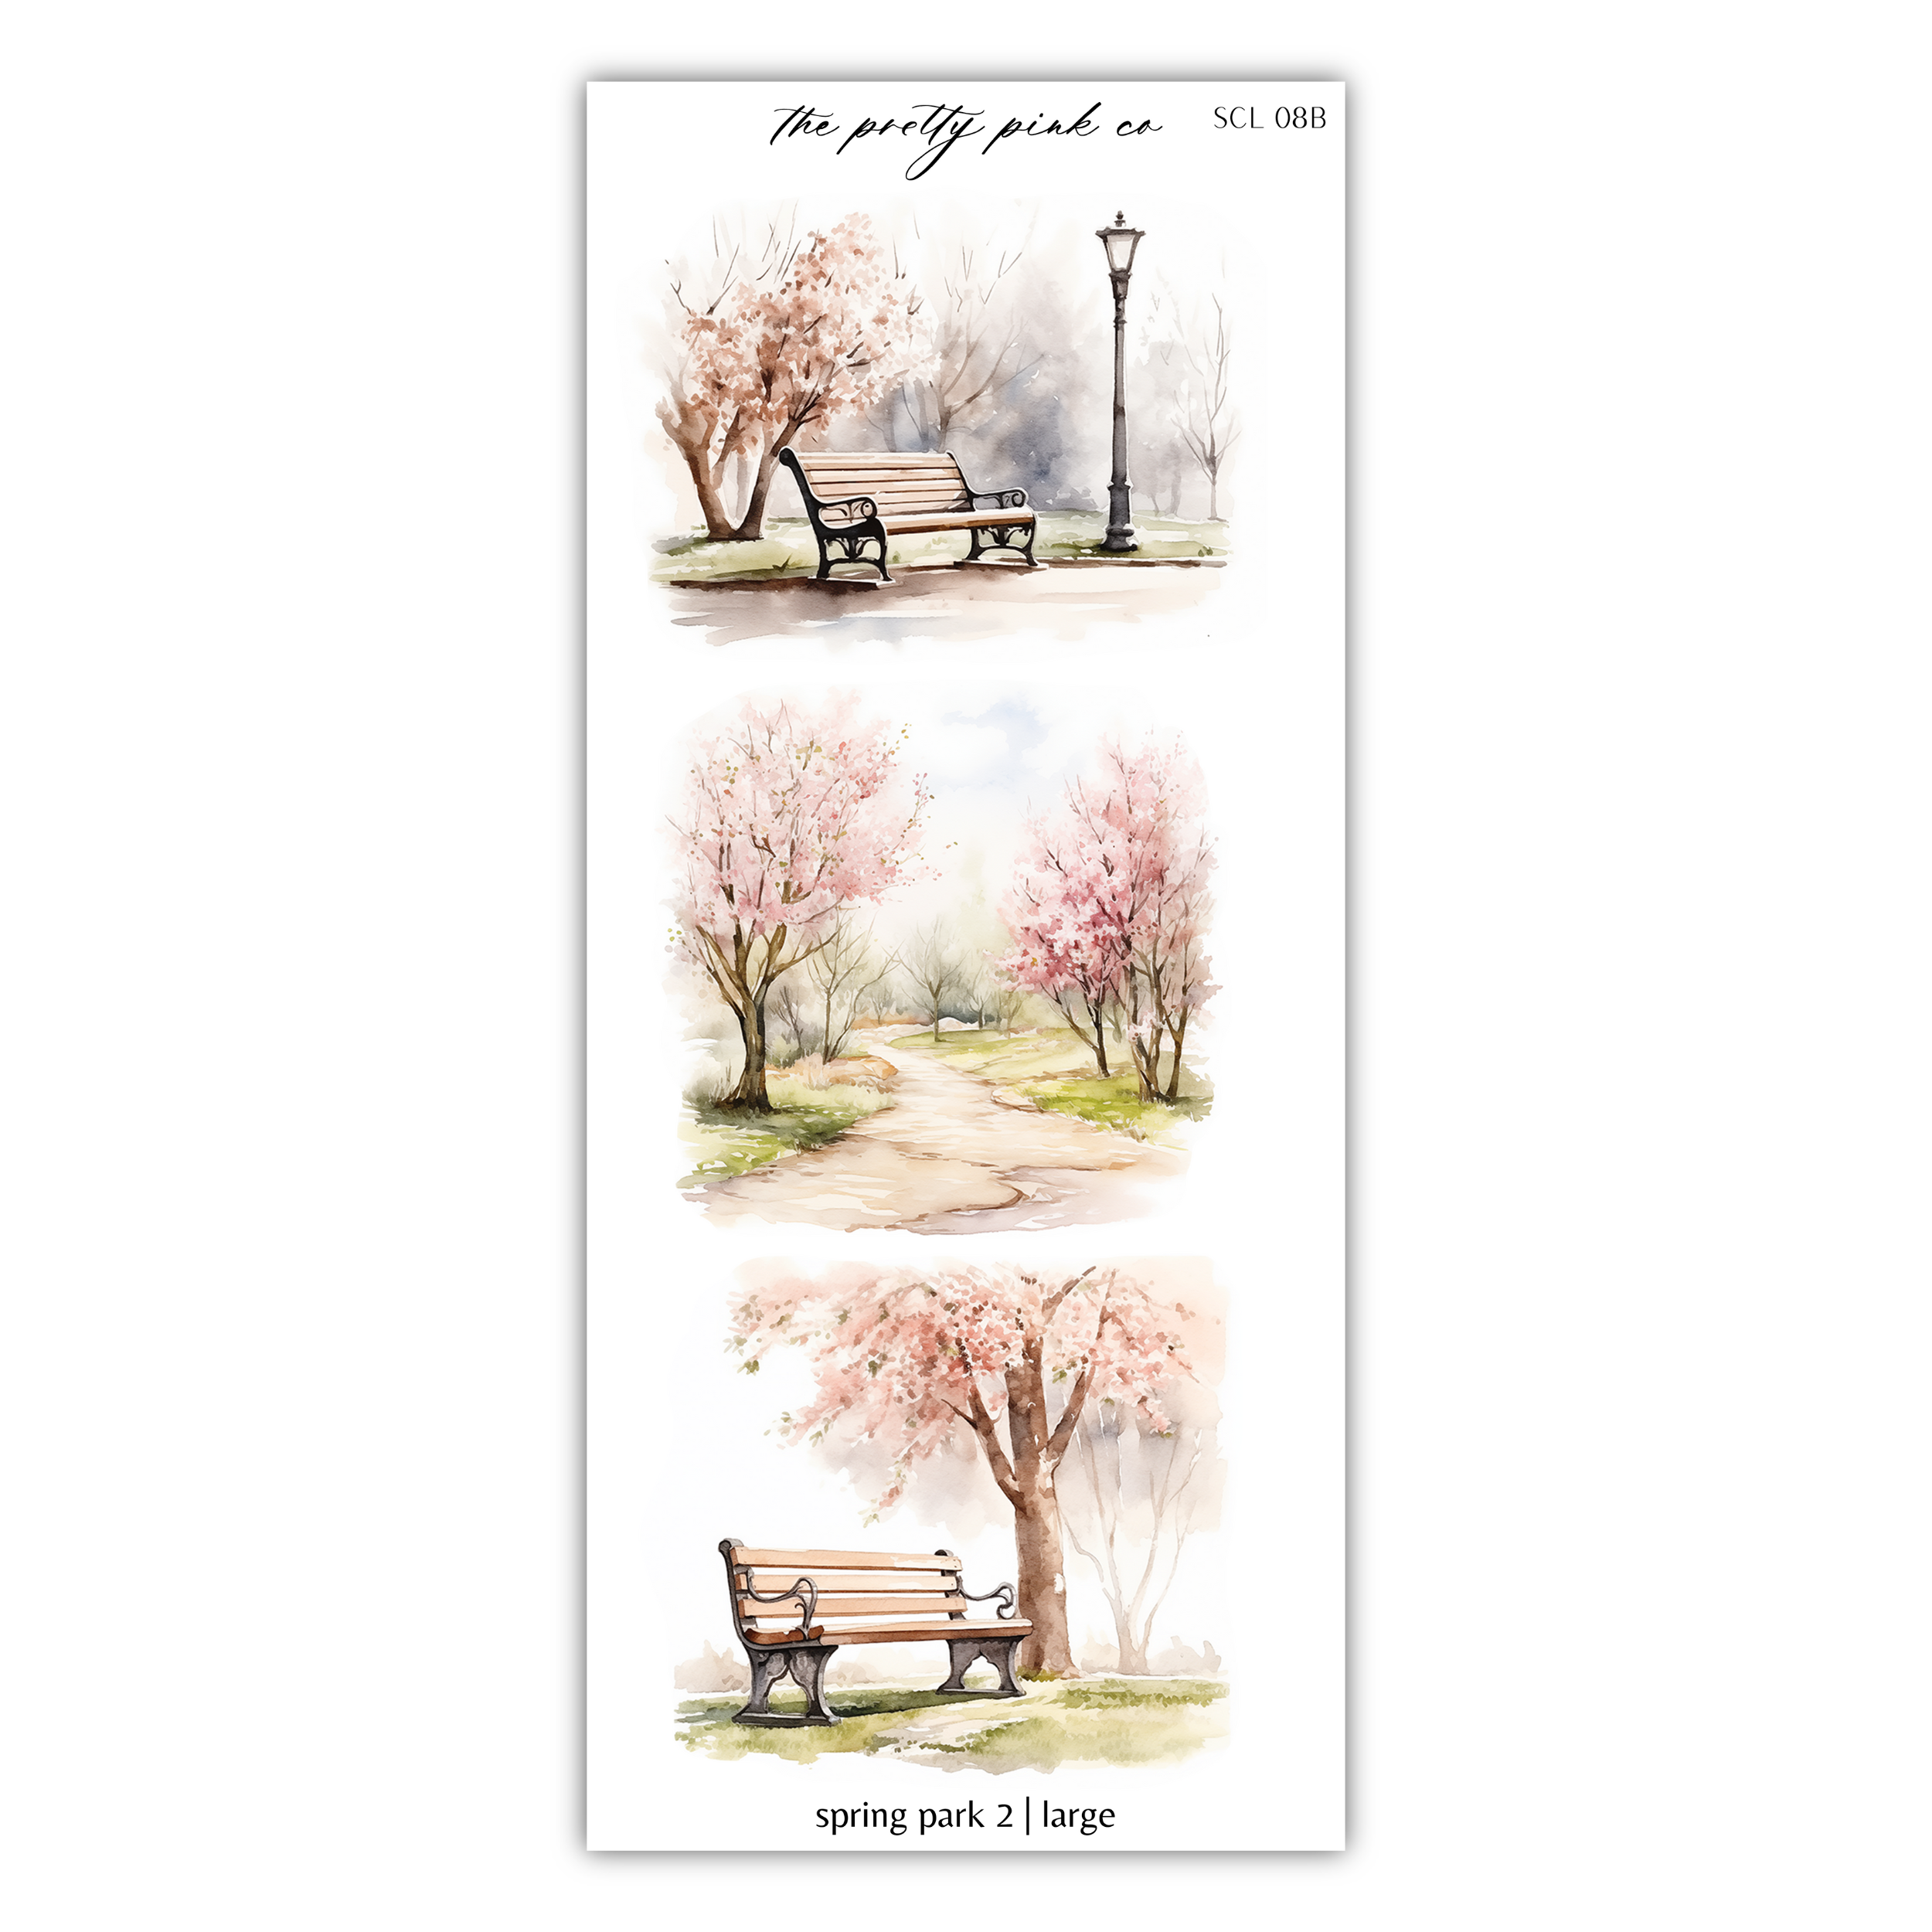 a watercolor painting of a park bench and trees